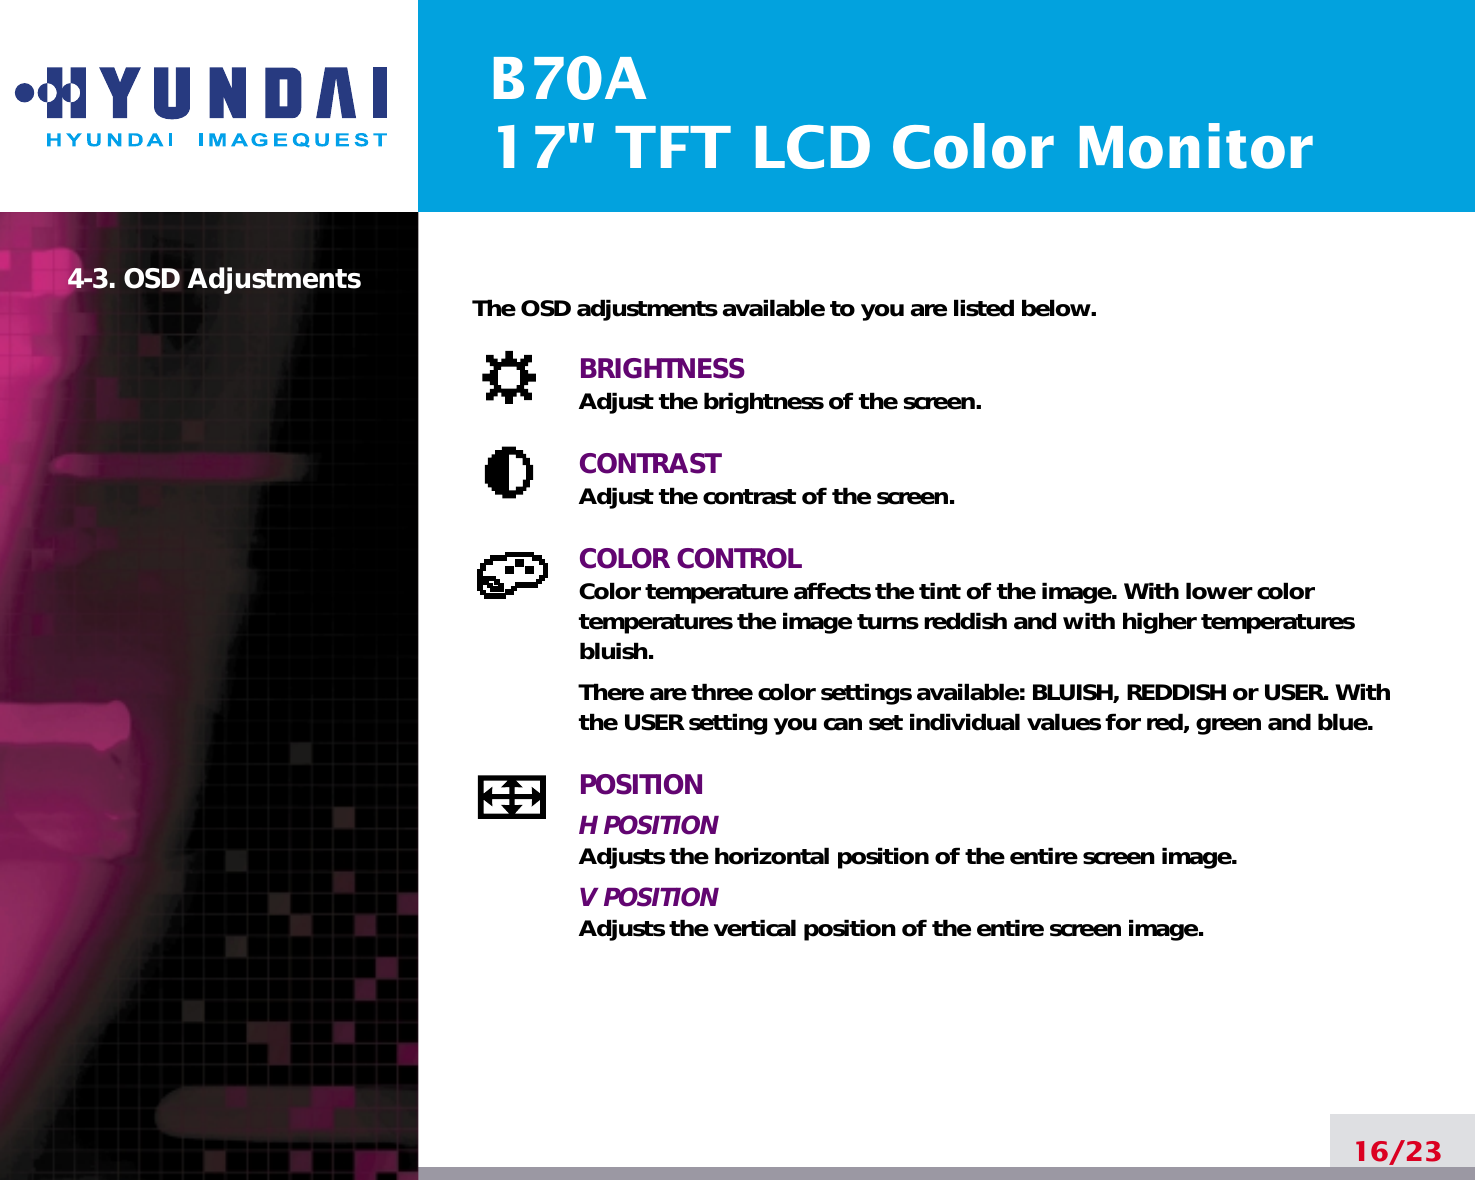 B70A17&quot; TFT LCD Color Monitor16/234-3. OSD Adjustments The OSD adjustments available to you are listed below.BRIGHTNESSAdjust the brightness of the screen.CONTRASTAdjust the contrast of the screen.COLOR CONTROLColor temperature affects the tint of the image. With lower color temperatures the image turns reddish and with higher temperatures bluish.There are three color settings available: BLUISH, REDDISH or USER. Withthe USER setting you can set individual values for red, green and blue.POSITIONH POSITIONAdjusts the horizontal position of the entire screen image.V POSITIONAdjusts the vertical position of the entire screen image.